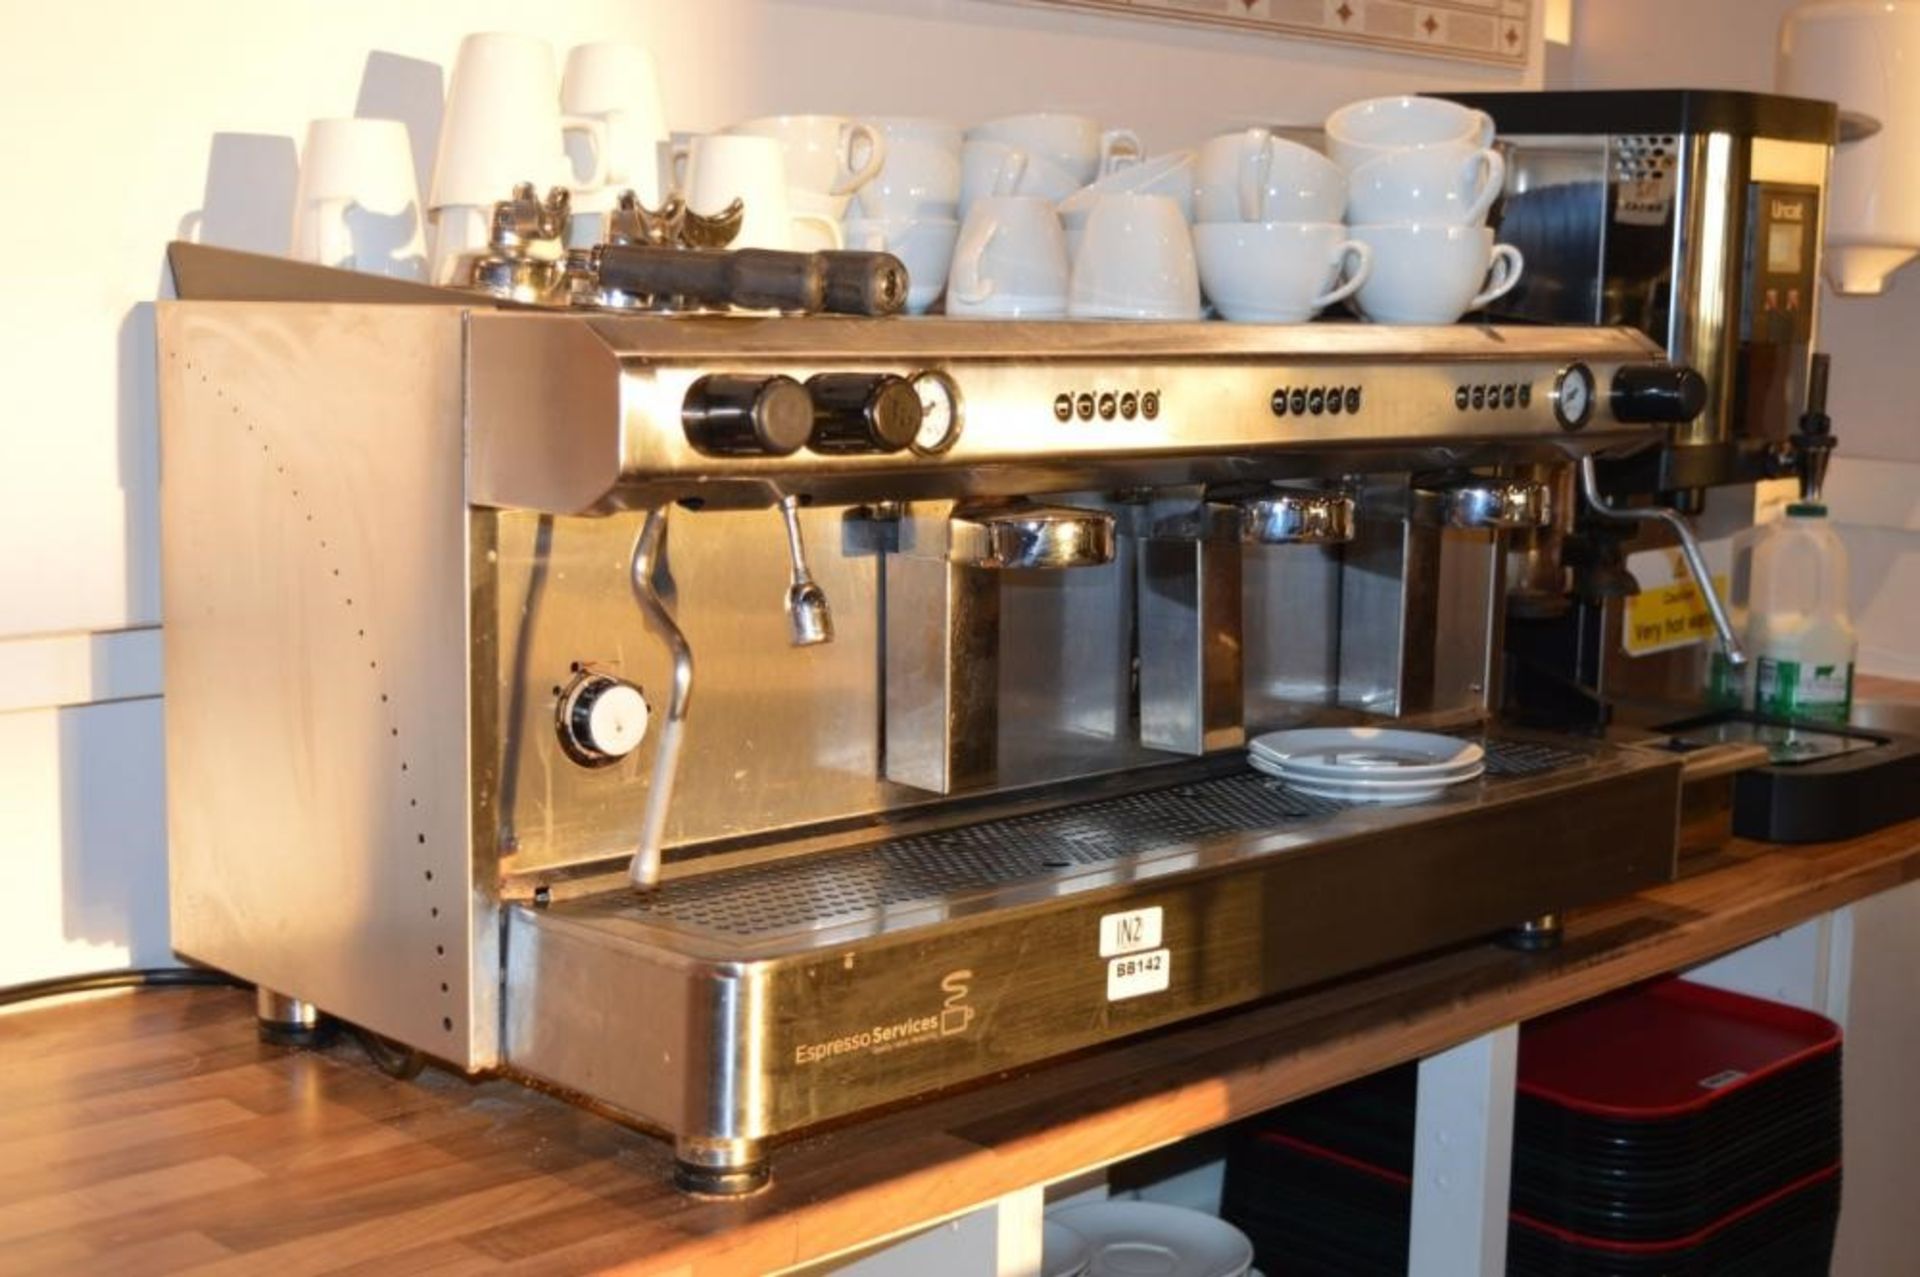 1 x Stainless Steel Three Group Commercial Coffee Machine With Filter Holders - H43 x W94 x D51 cms - Image 2 of 4